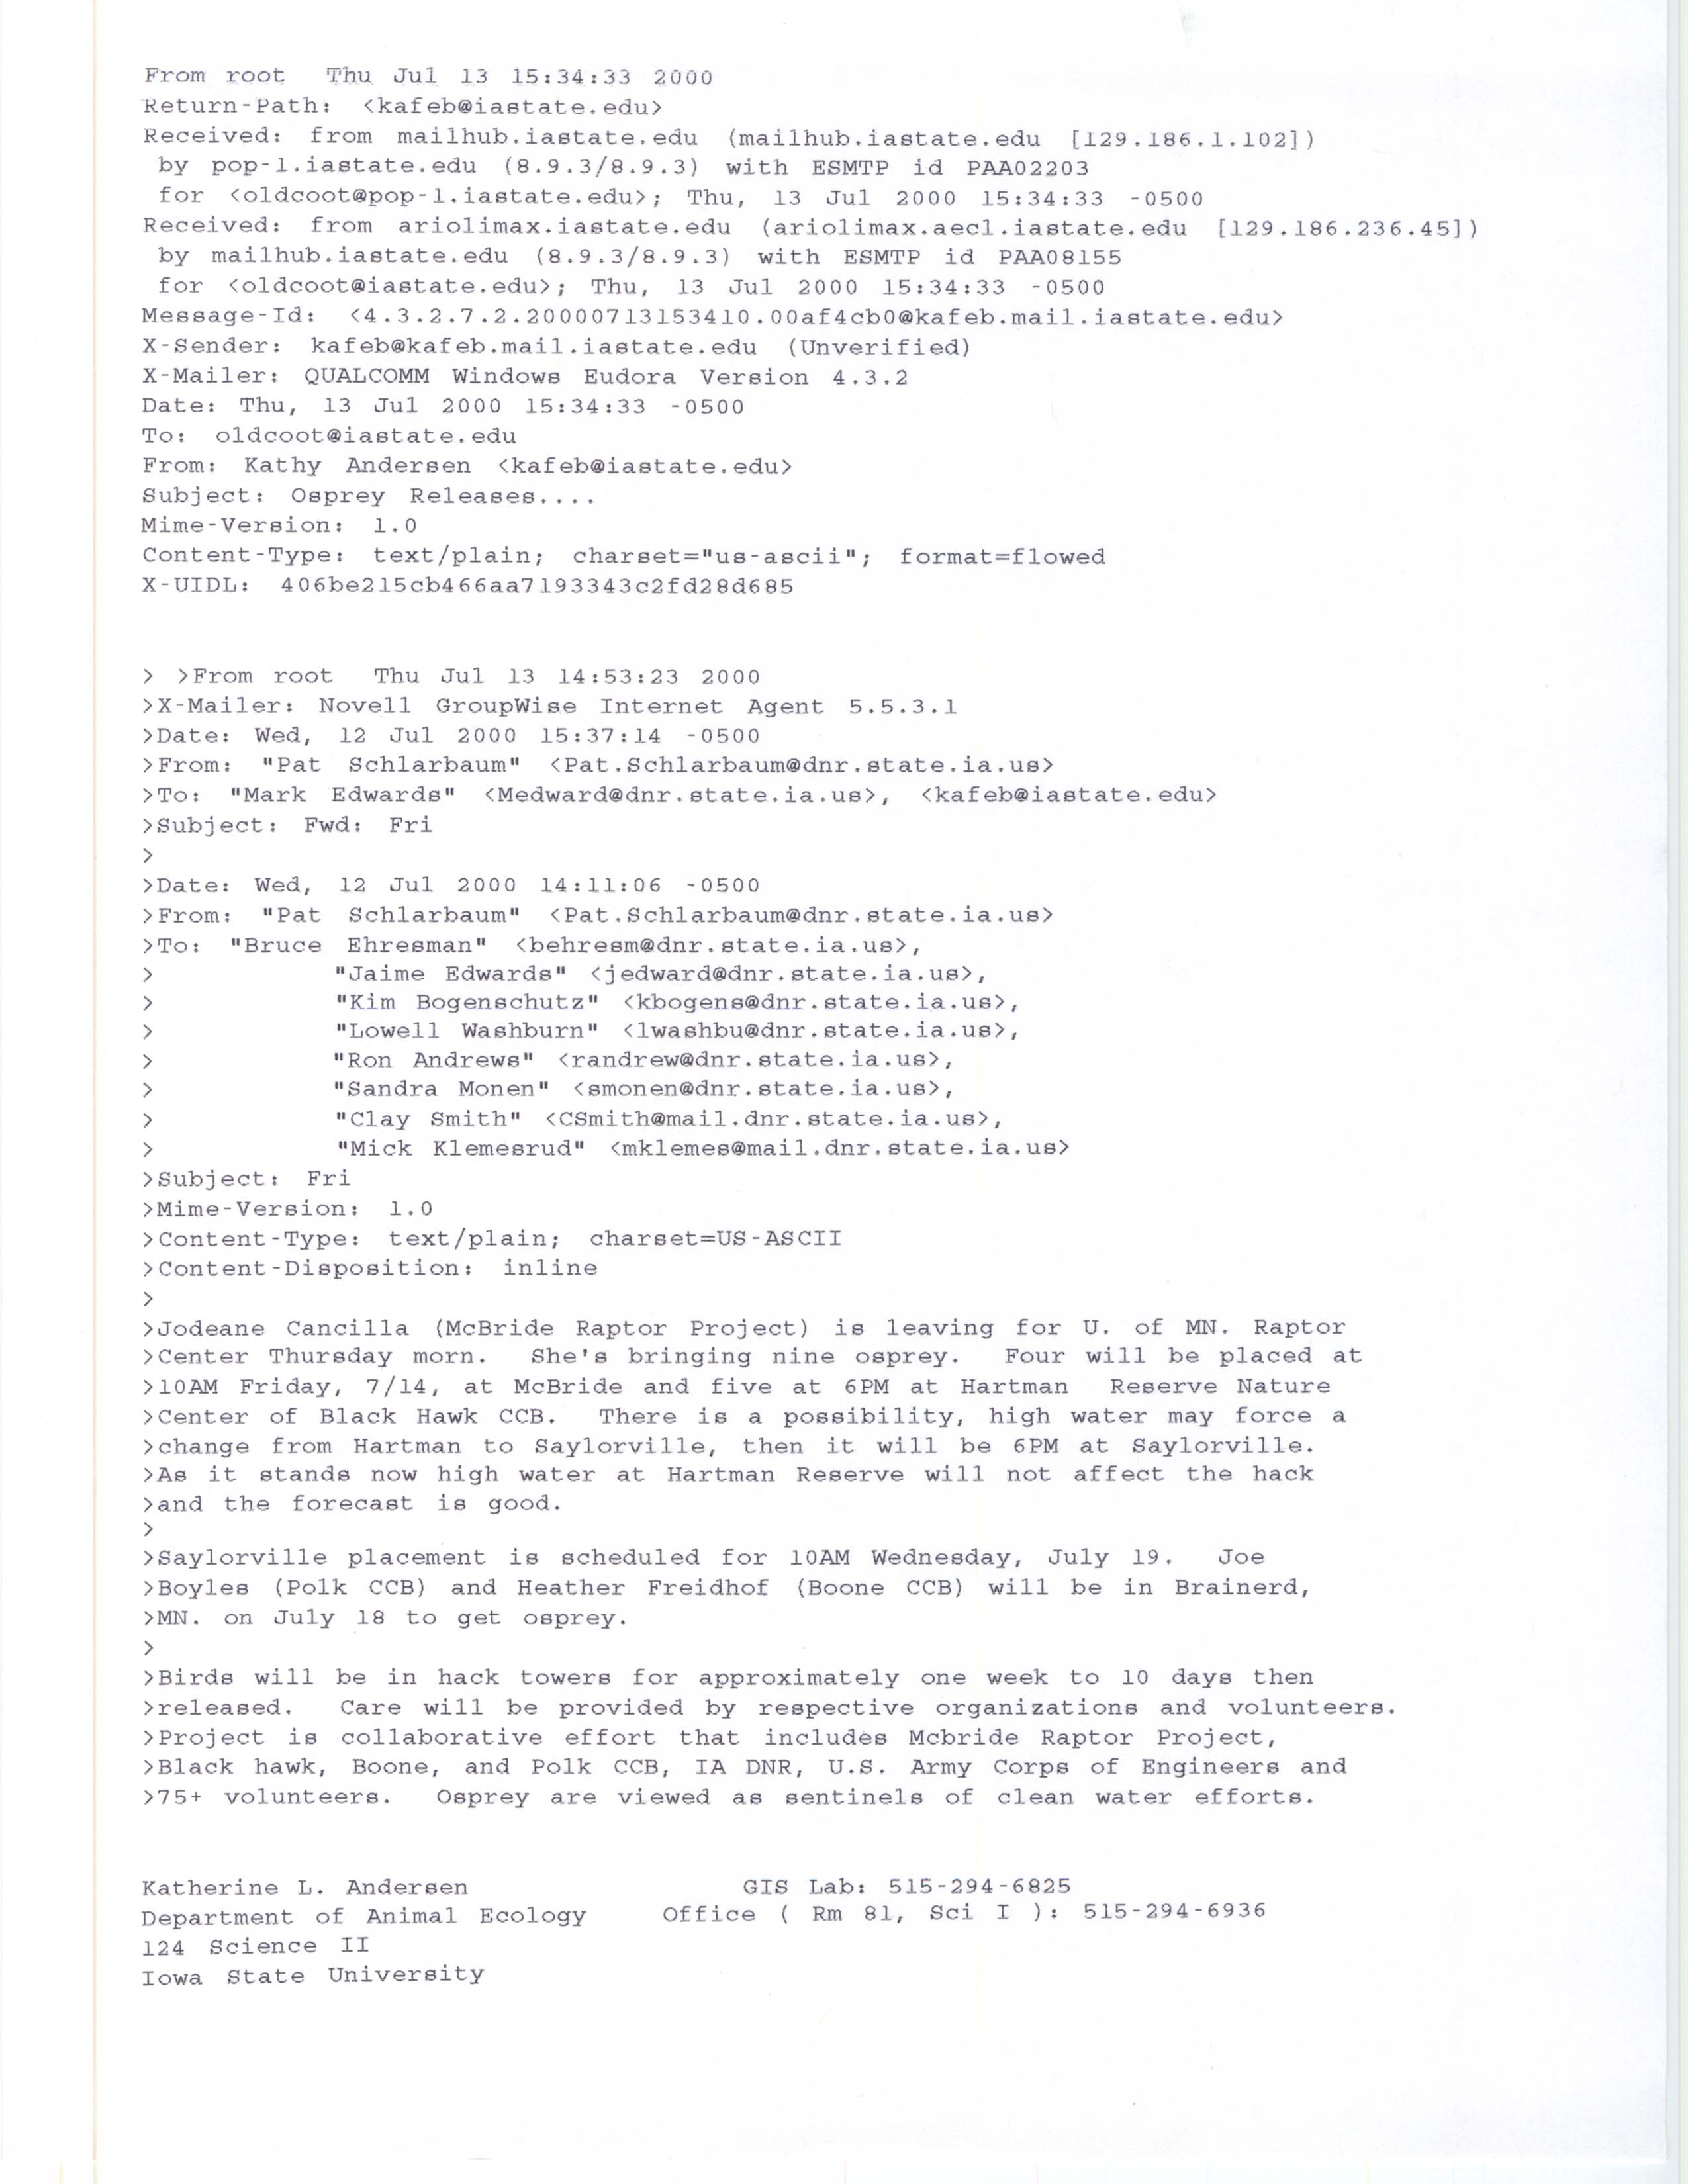 Kathy Andersen forwarded email from Pat Schlarbaum to James J. Dinsmore regarding an Osprey release, July 13, 2000